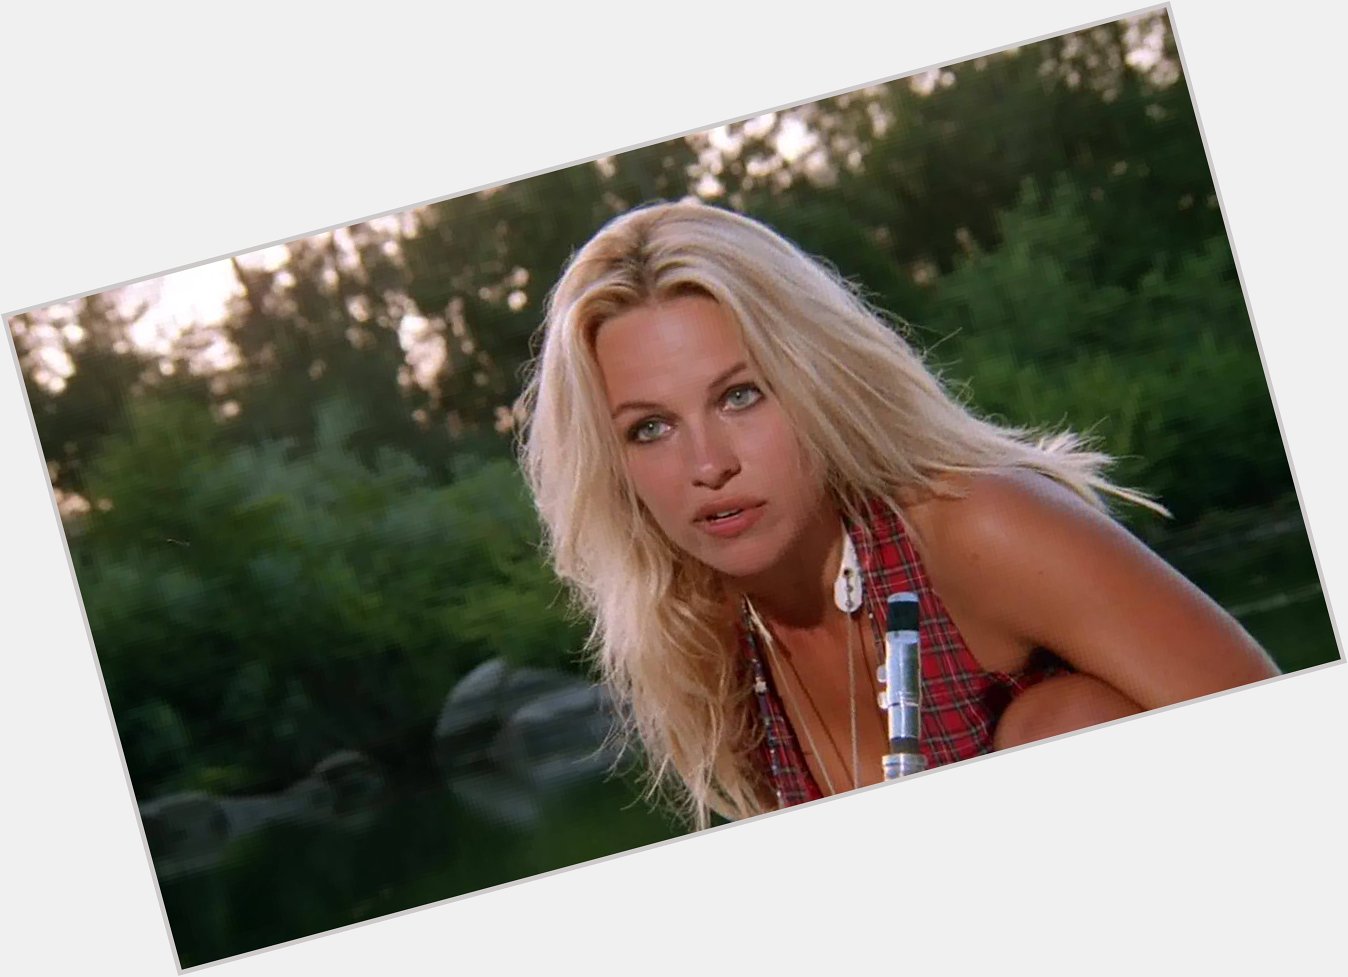 Happy birthday, Pamela Anderson!

Relive the moment we all met her on 